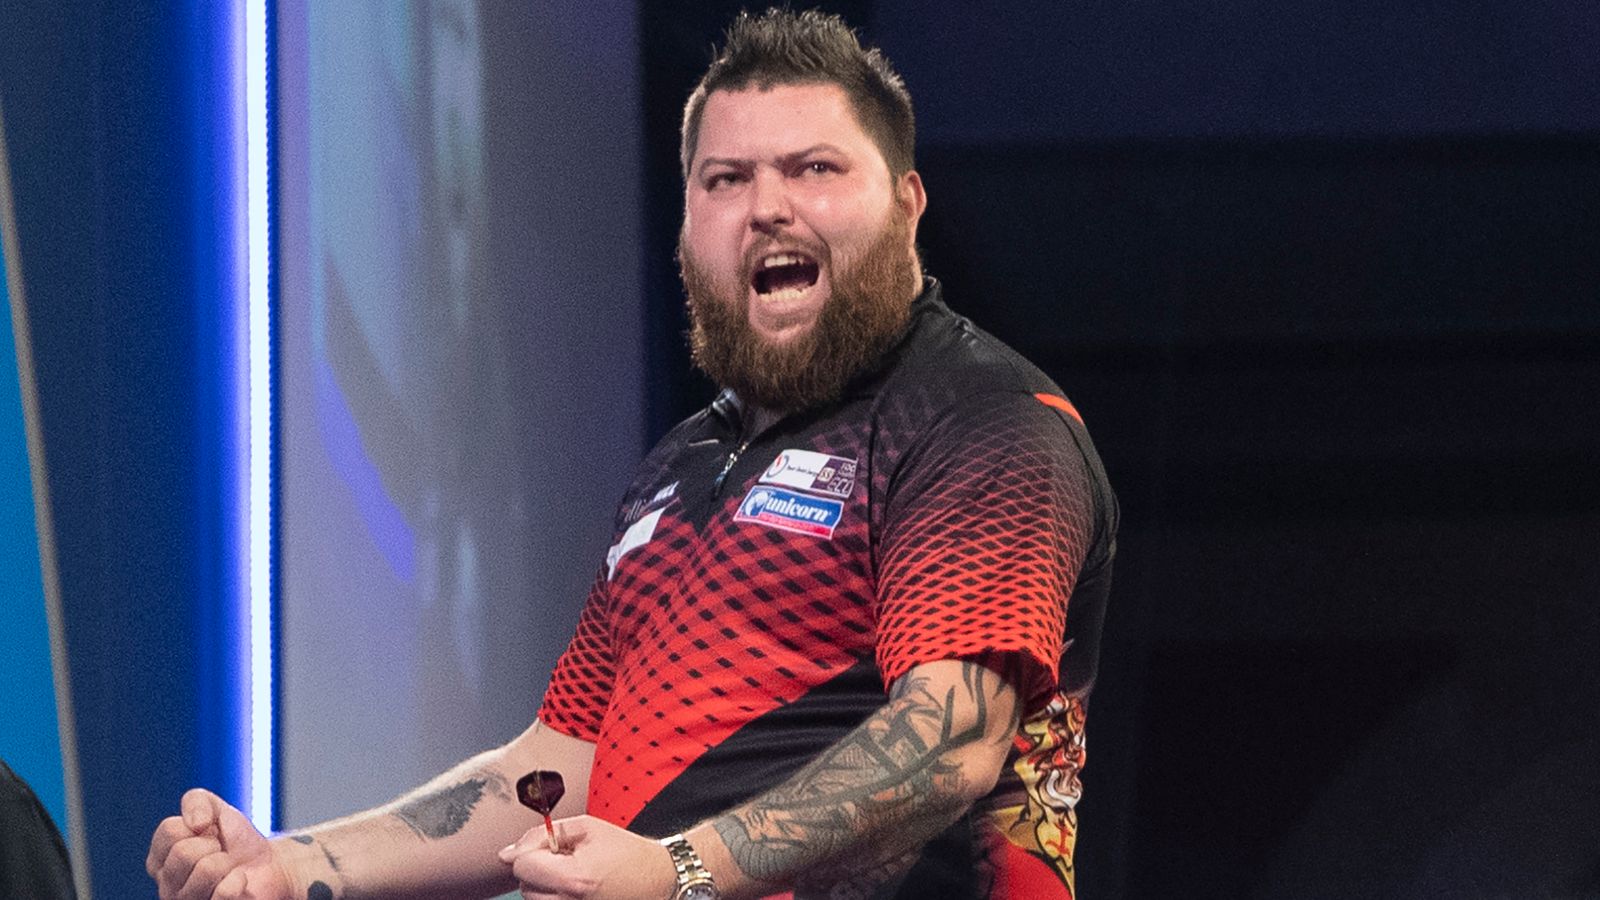 Michael Smith secures first Premier League win in Newcastle as Joe Cullen seals play-off-place